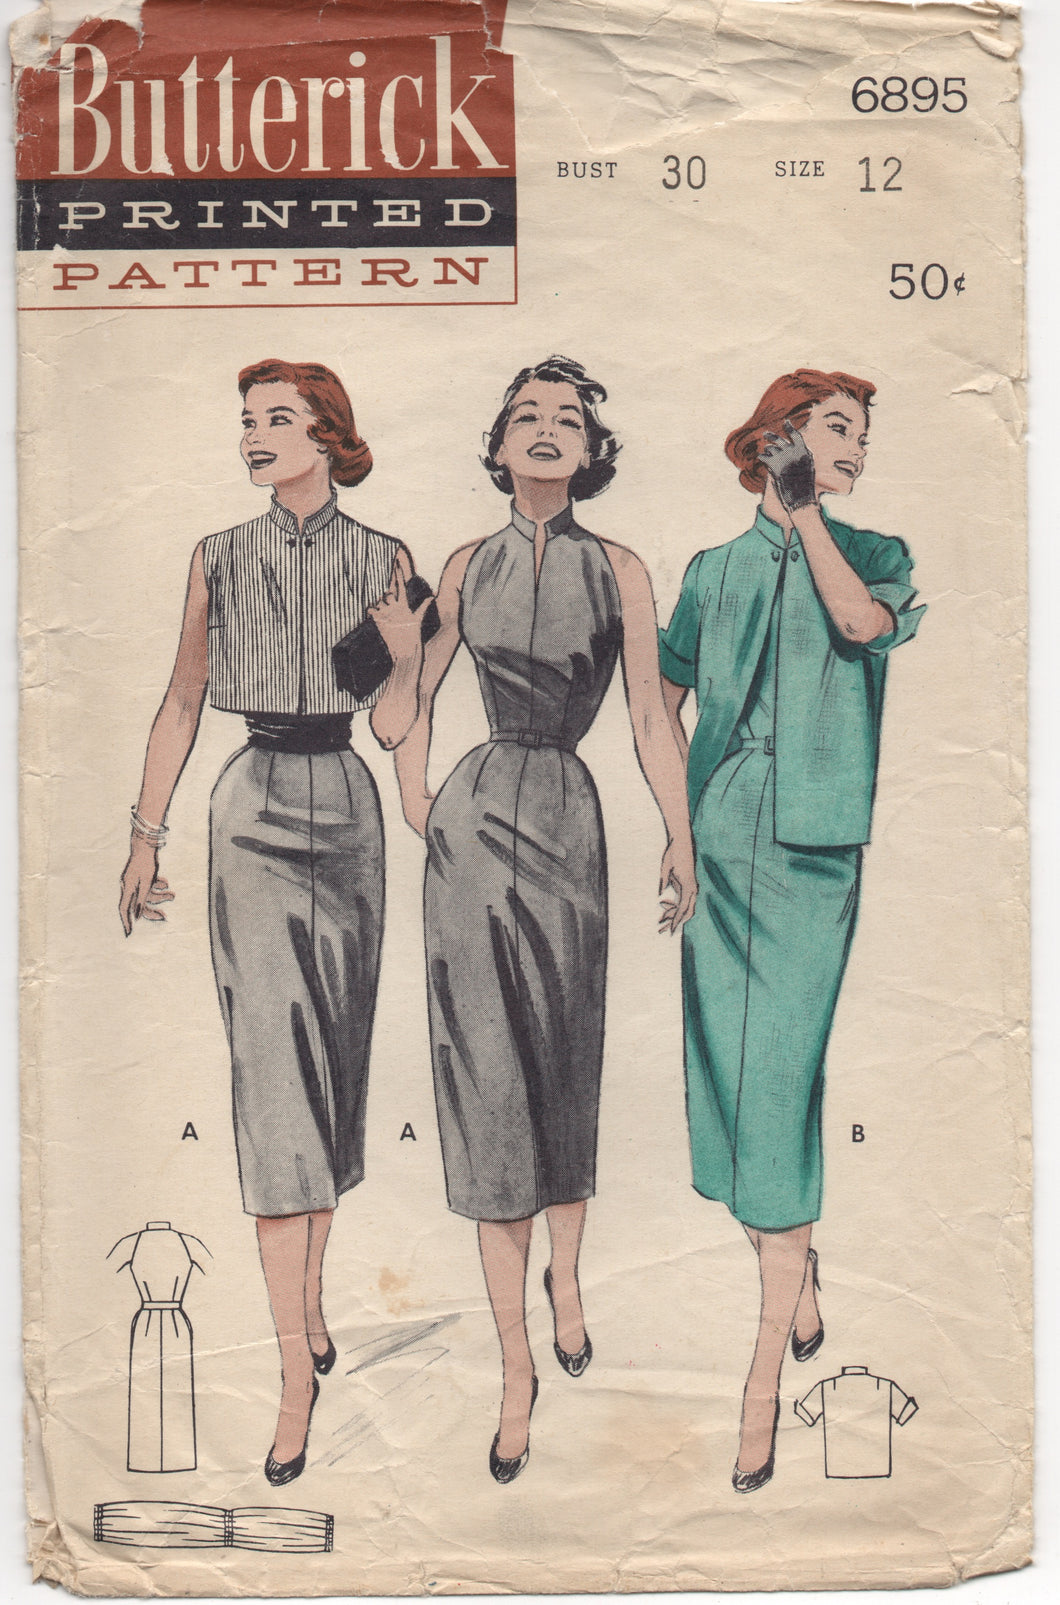 1950's Butterick Slim Fit Sleeveless Dress with Two Style of Jackets - Bust 30